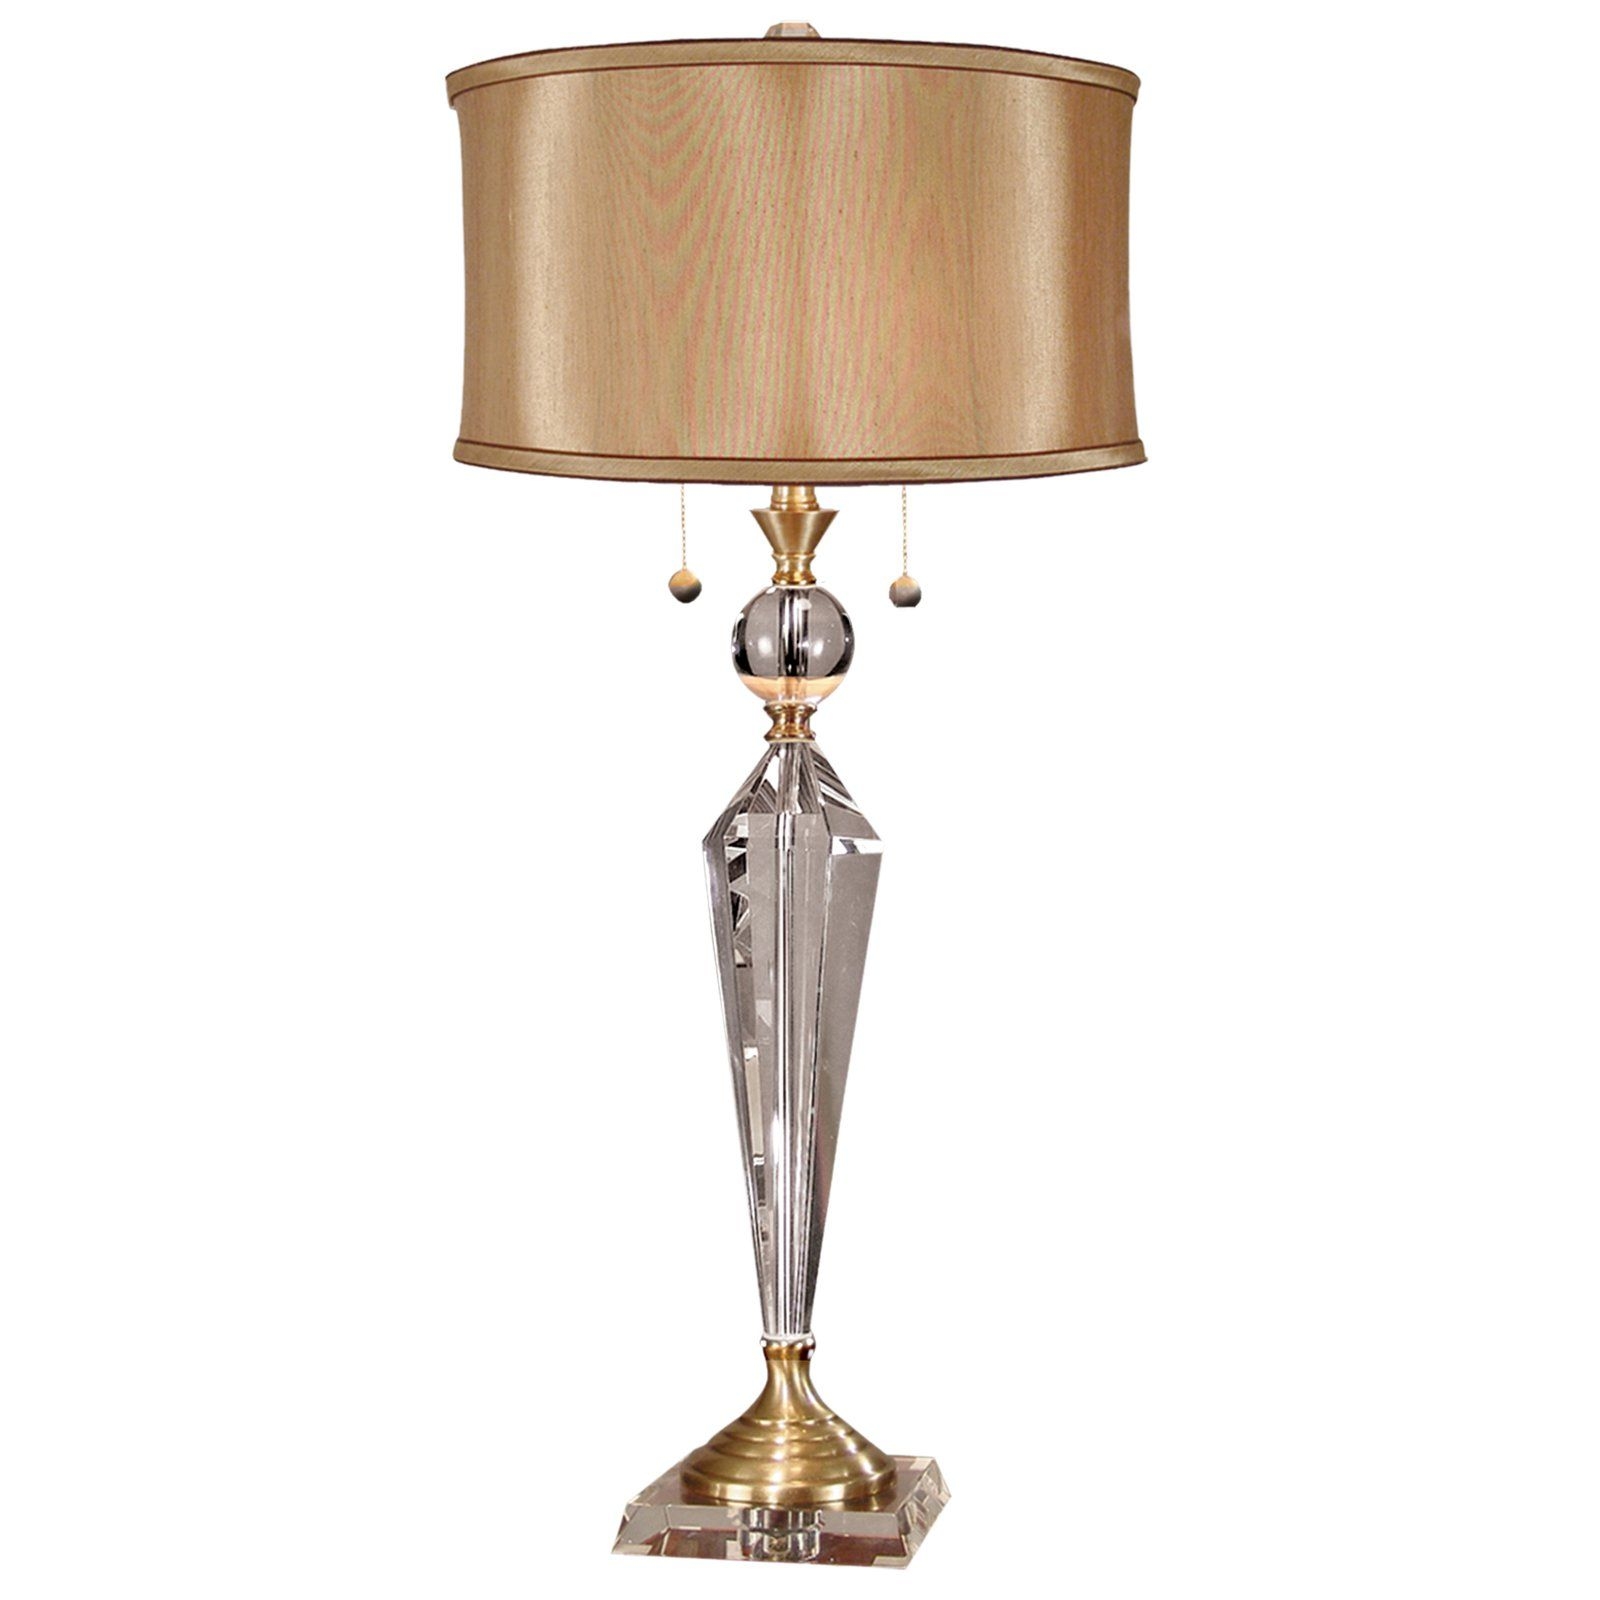 Strada Crystal 32.75" H Table Lamp with Drum Shade